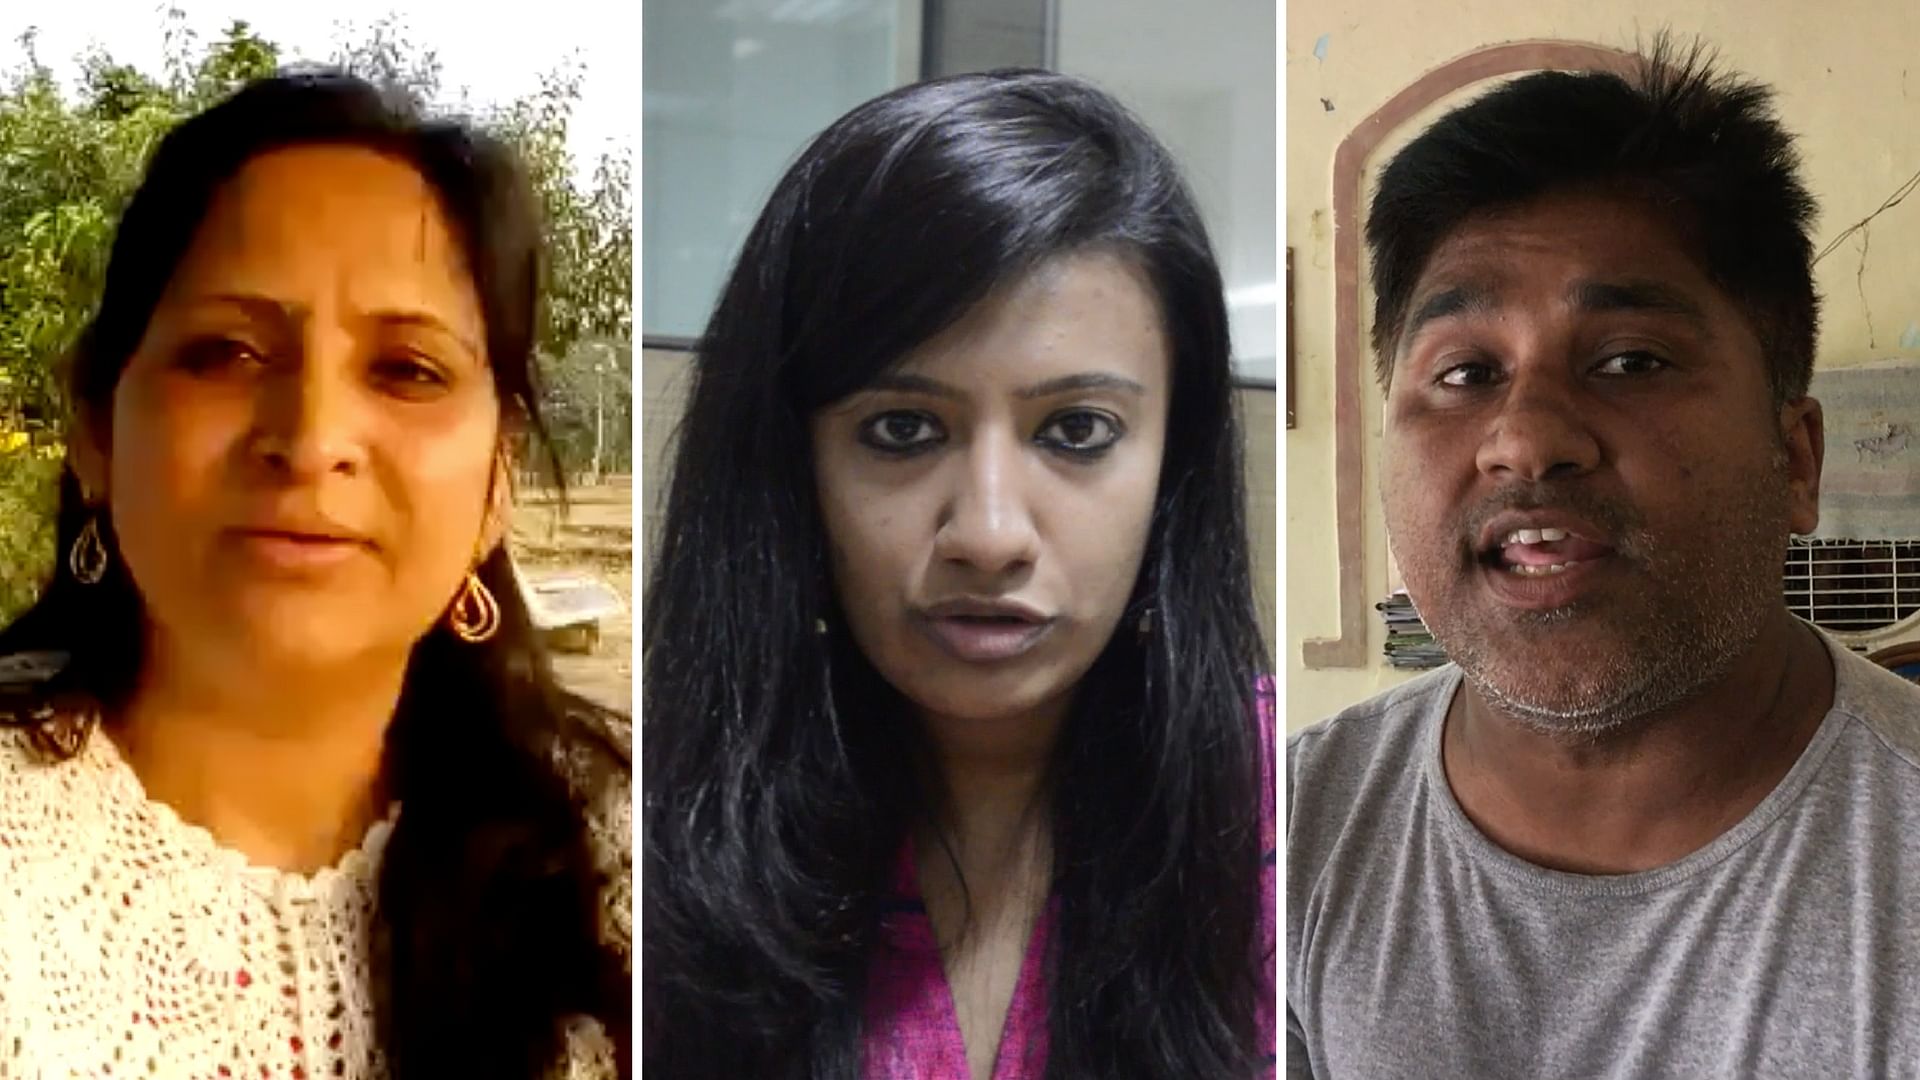 From corruption to inflation, these 5 voters talk about what will define their vote in the Gujarat elections.